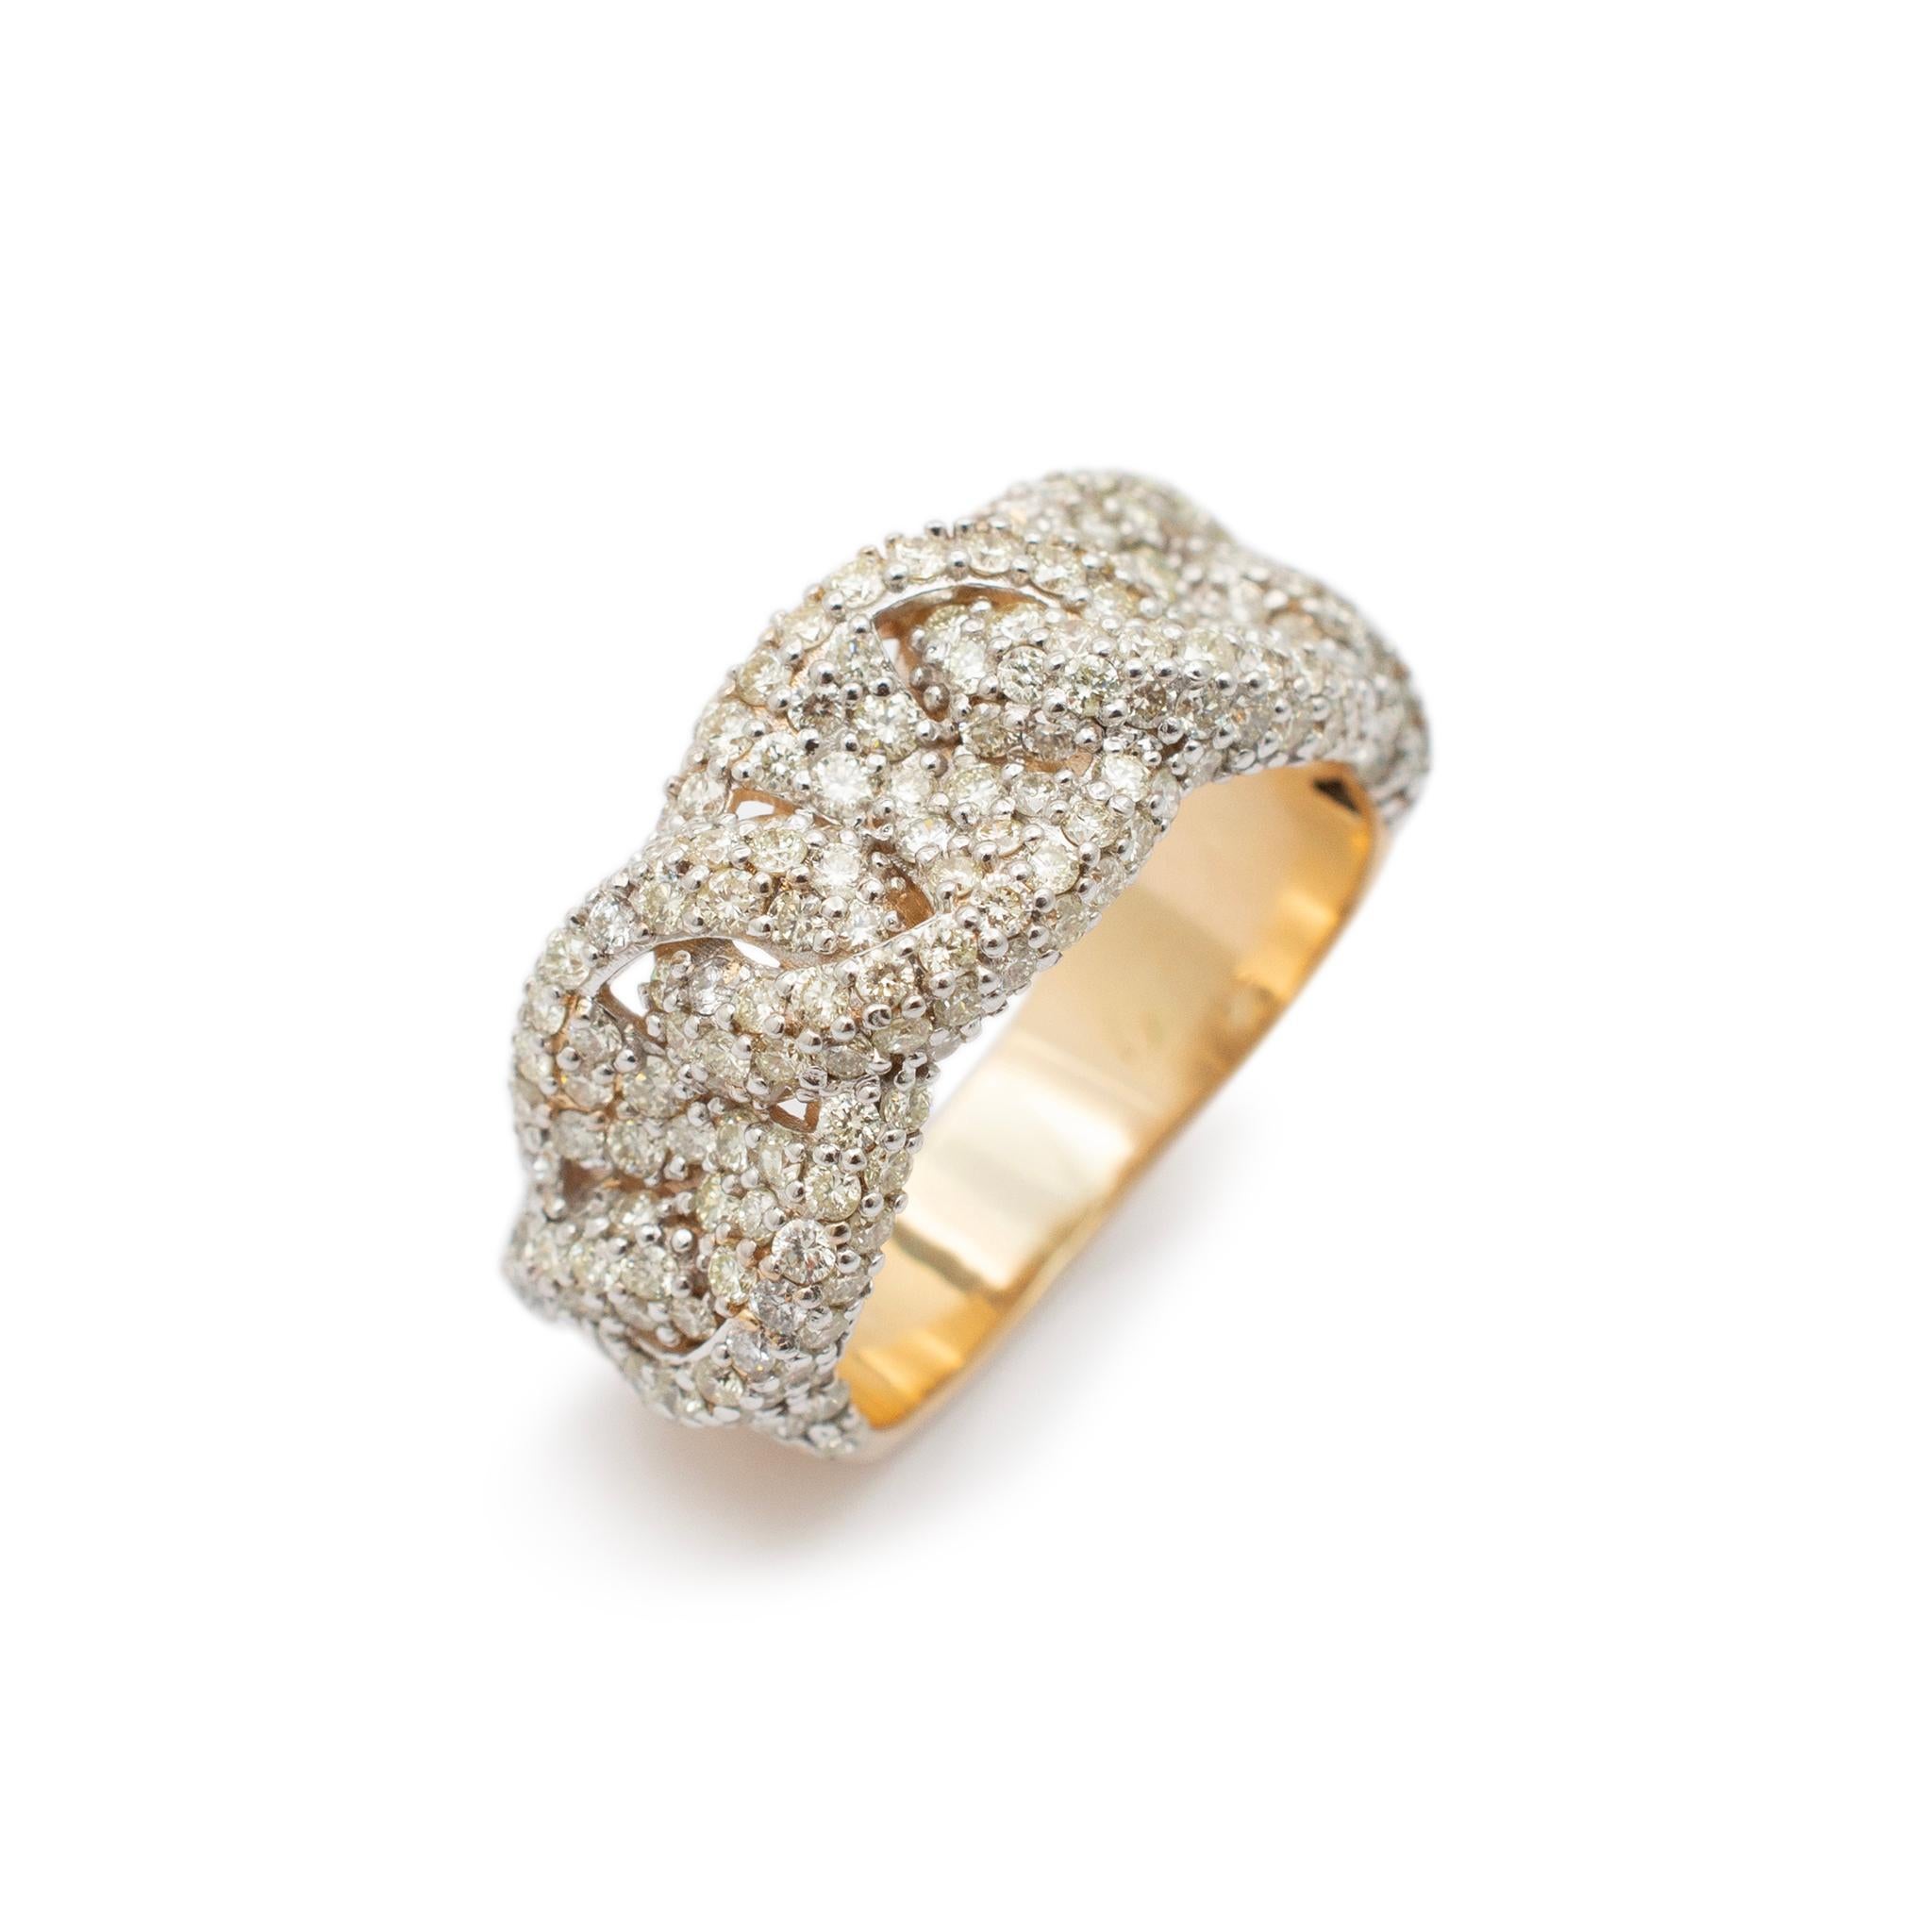 Gender: Ladies

Metal Type: 14K Yellow Gold

Size: 8.5

Shank Maximum Width: 10.75 mm tapering to 5.20 mm

Weight: 7.50 grams

14K yellow gold diamond cuban band ring with a half round shank.

Pre-owned in excellent condition. Might shows minor